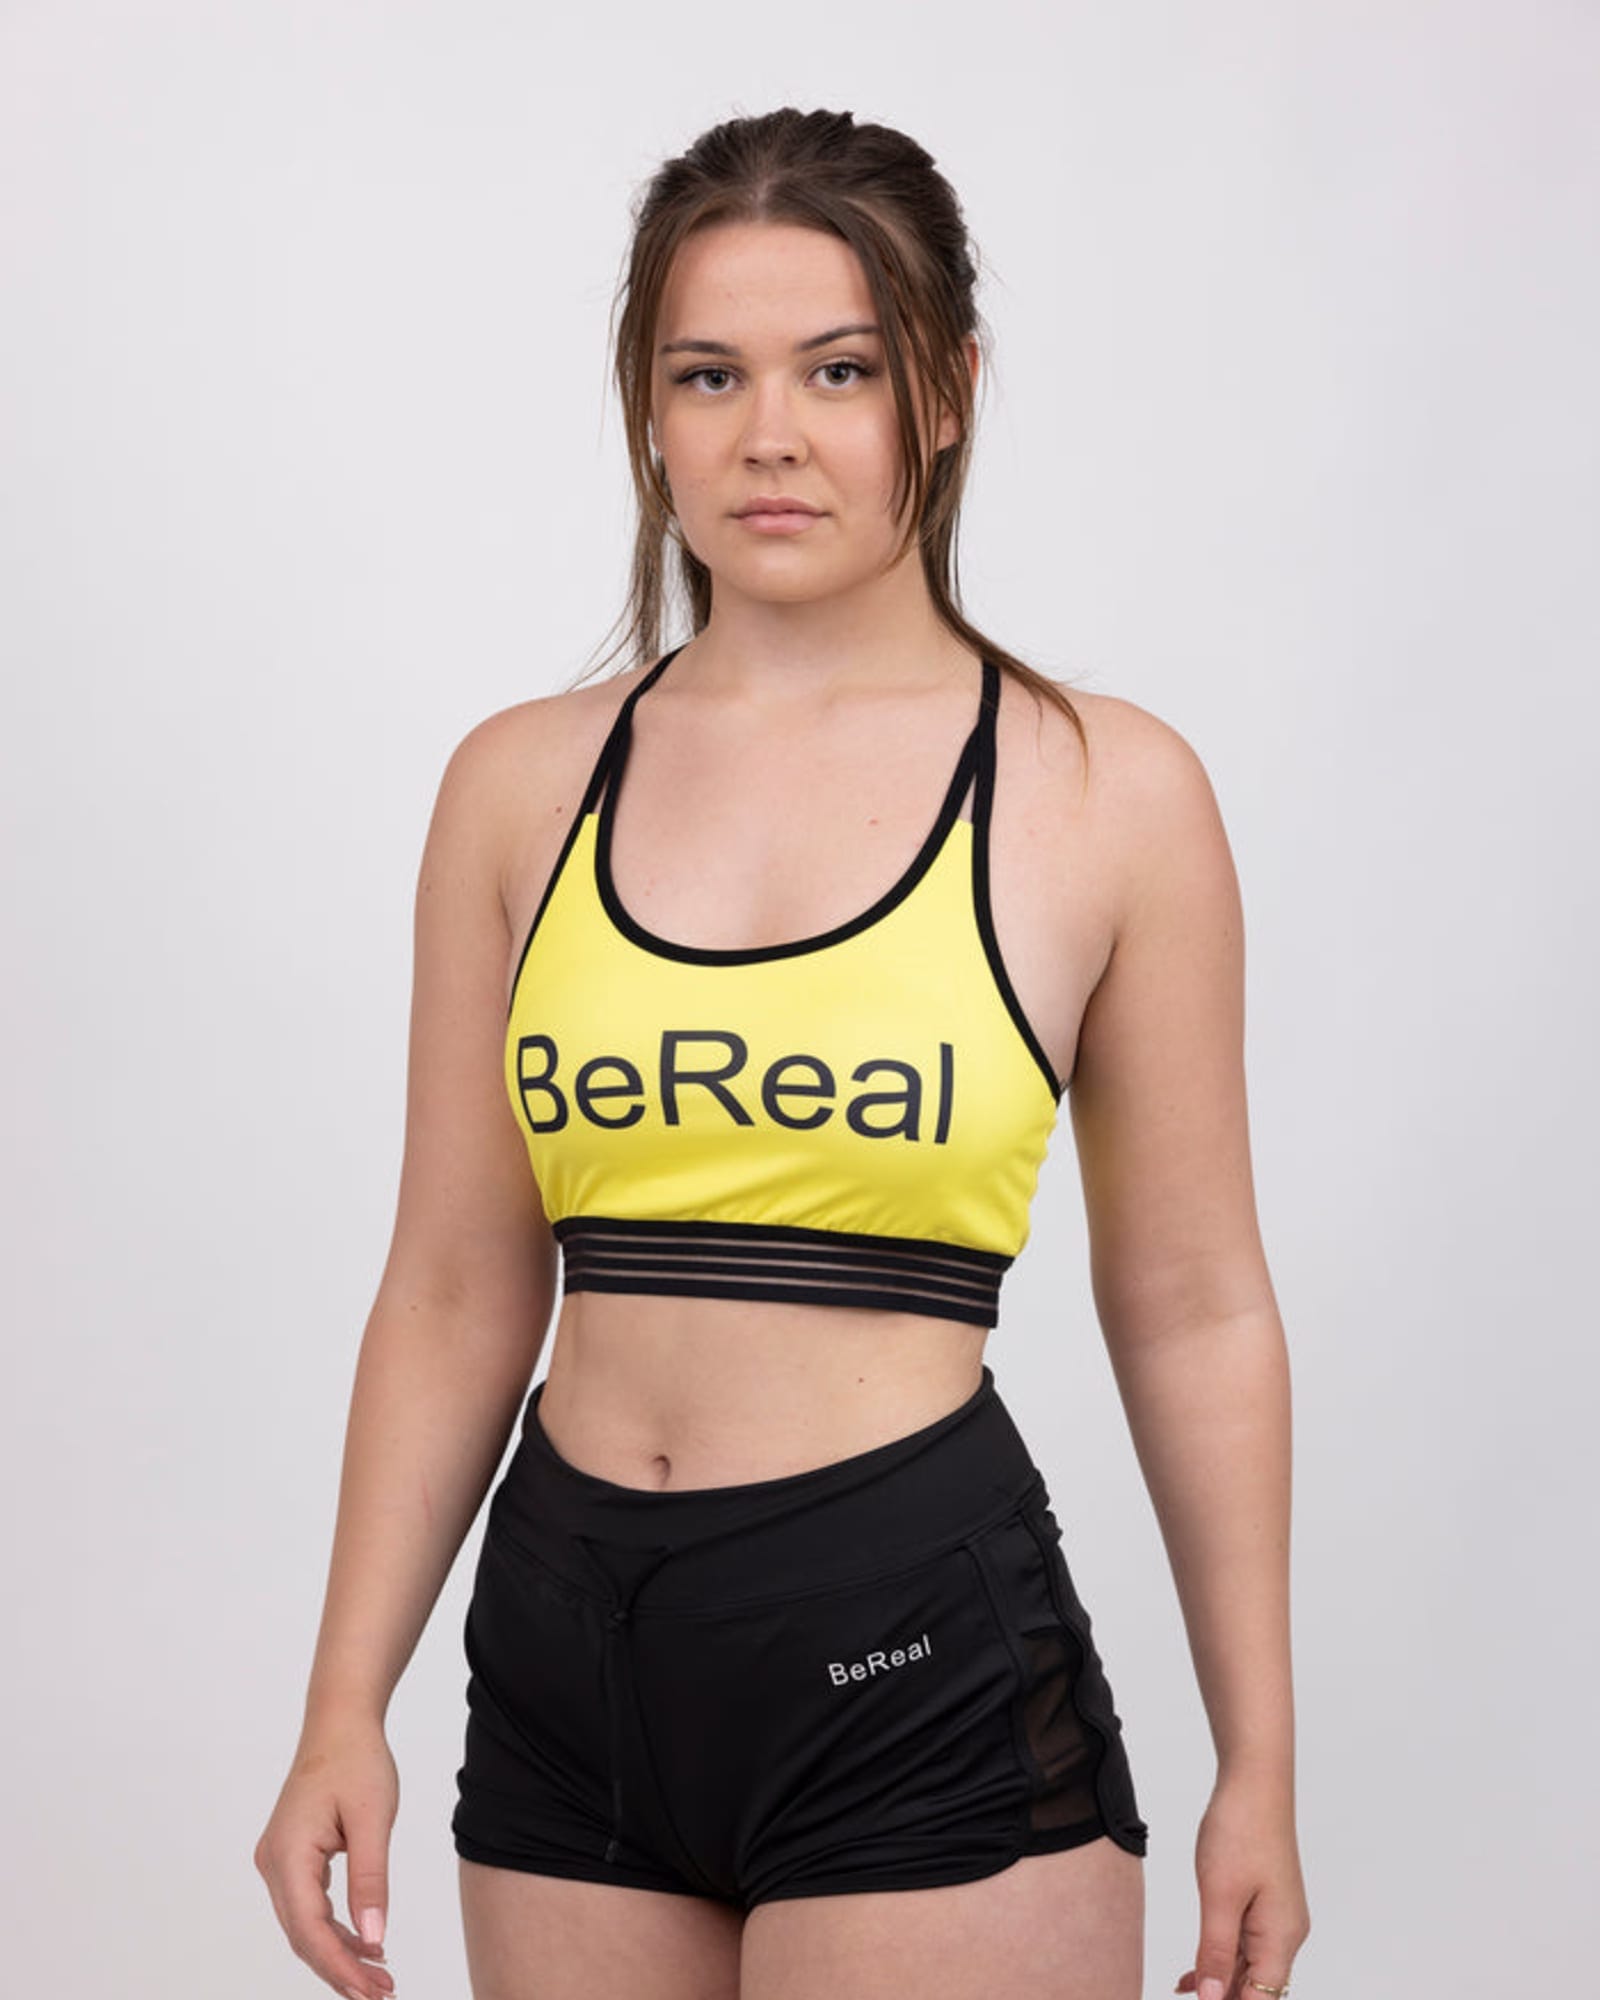 Dianes Lingerie - Delta Δ The sexiest, most supportive sports bra you'll  ever wear 🏋️‍♀️ Featuring wireless, terry-lined cups and breathable mesh  panels in all the right places 😉 Available in white